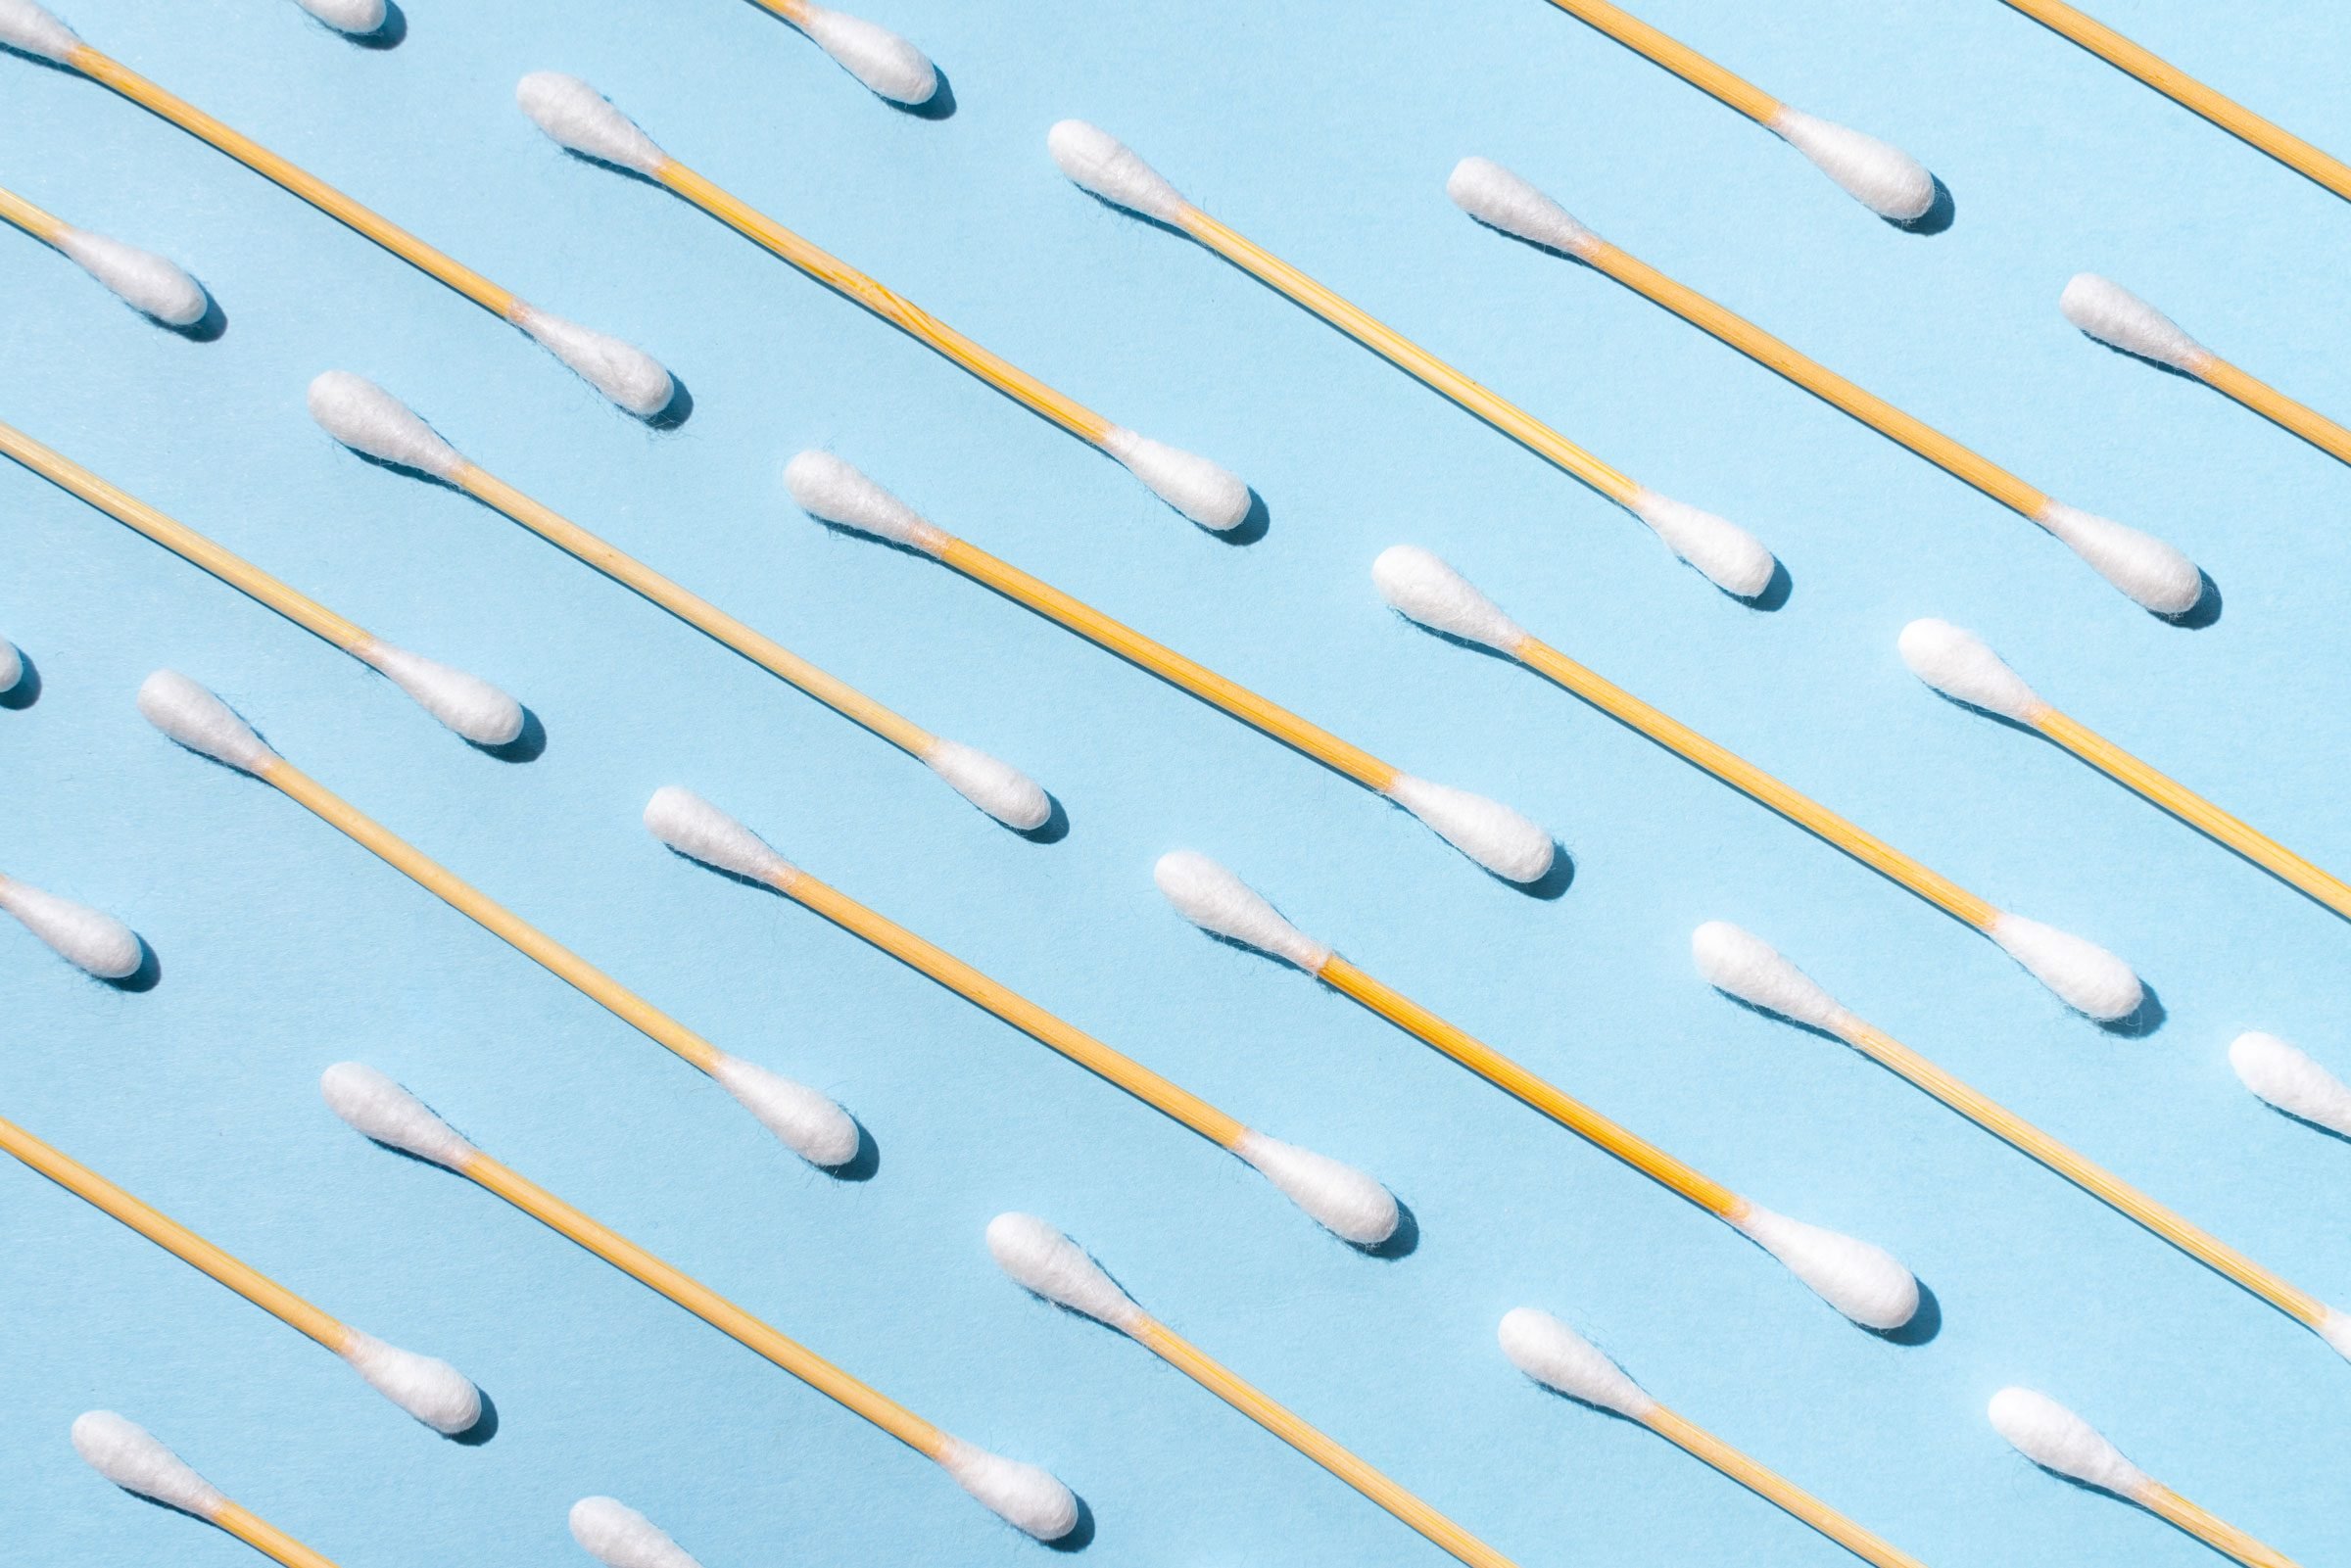 pattern of q-tips on a blue background